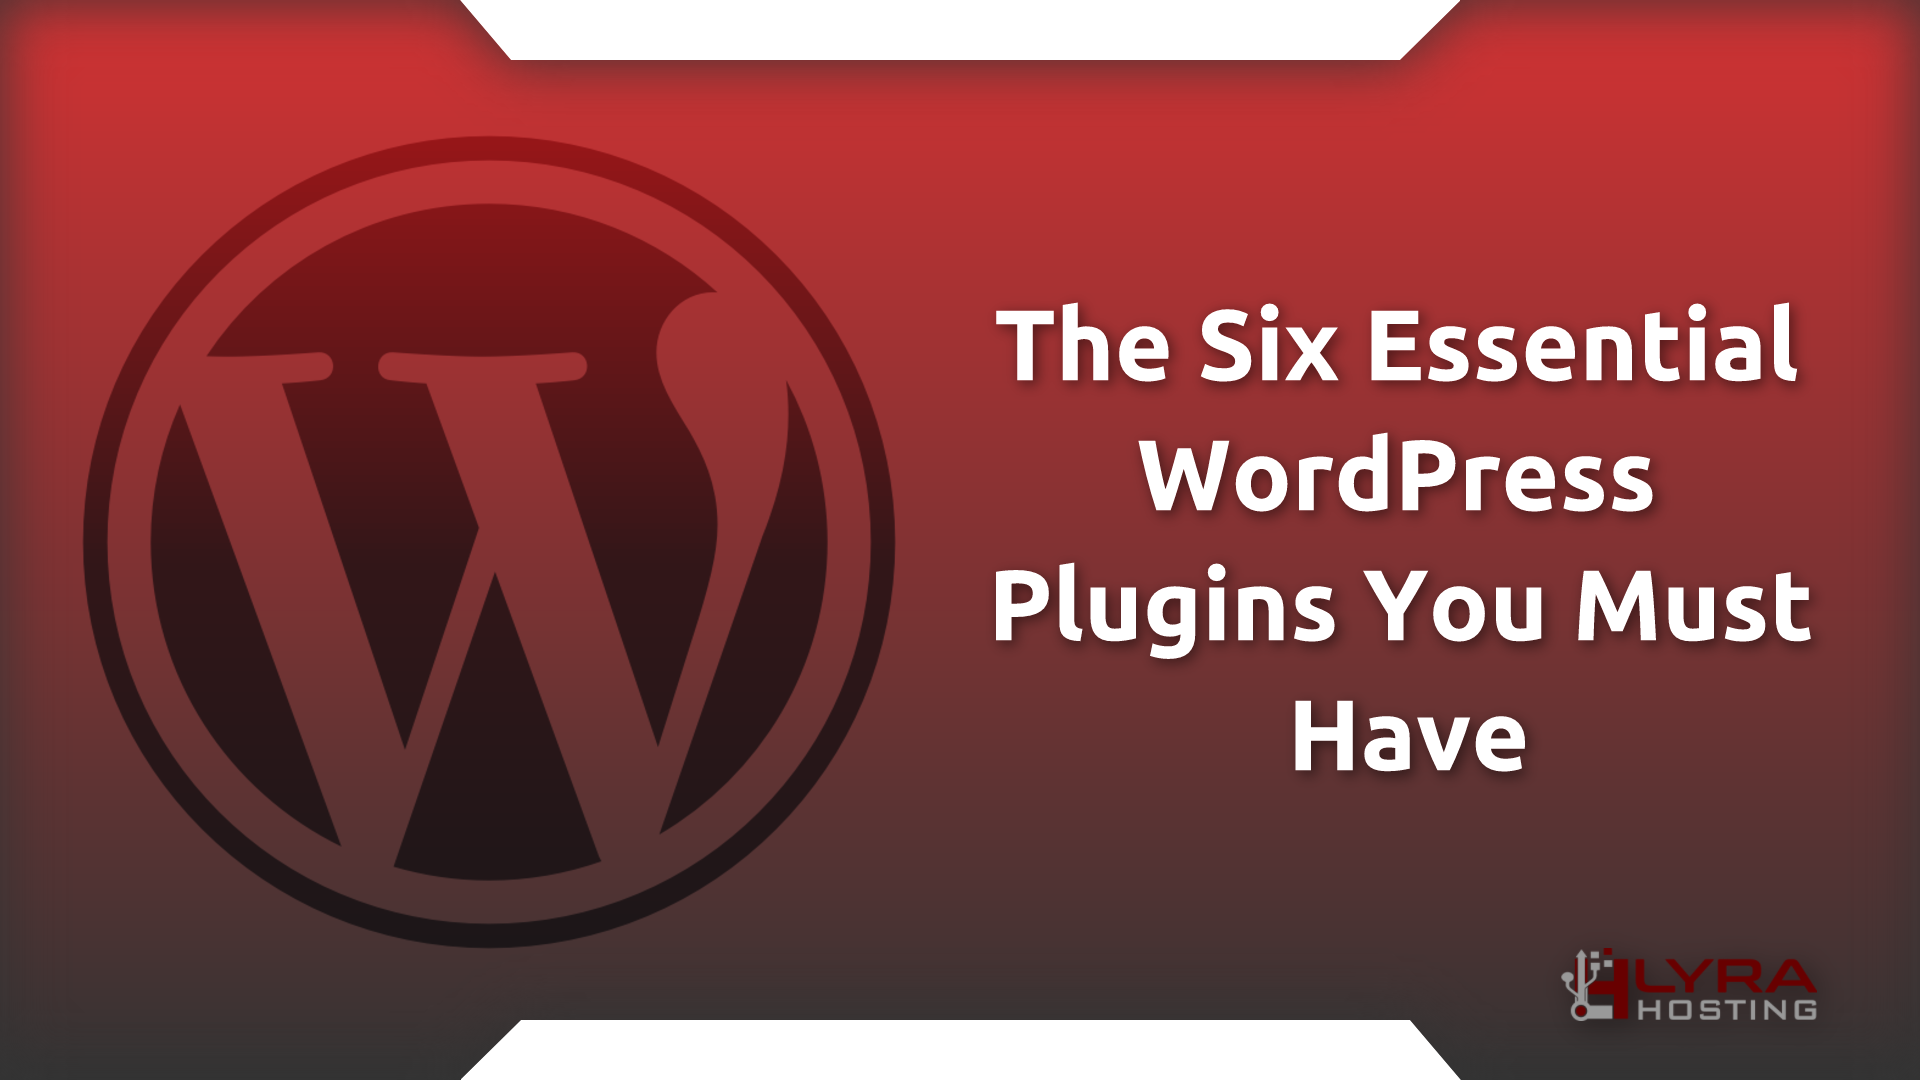 The Six Essential WordPress Plugins You Must Have